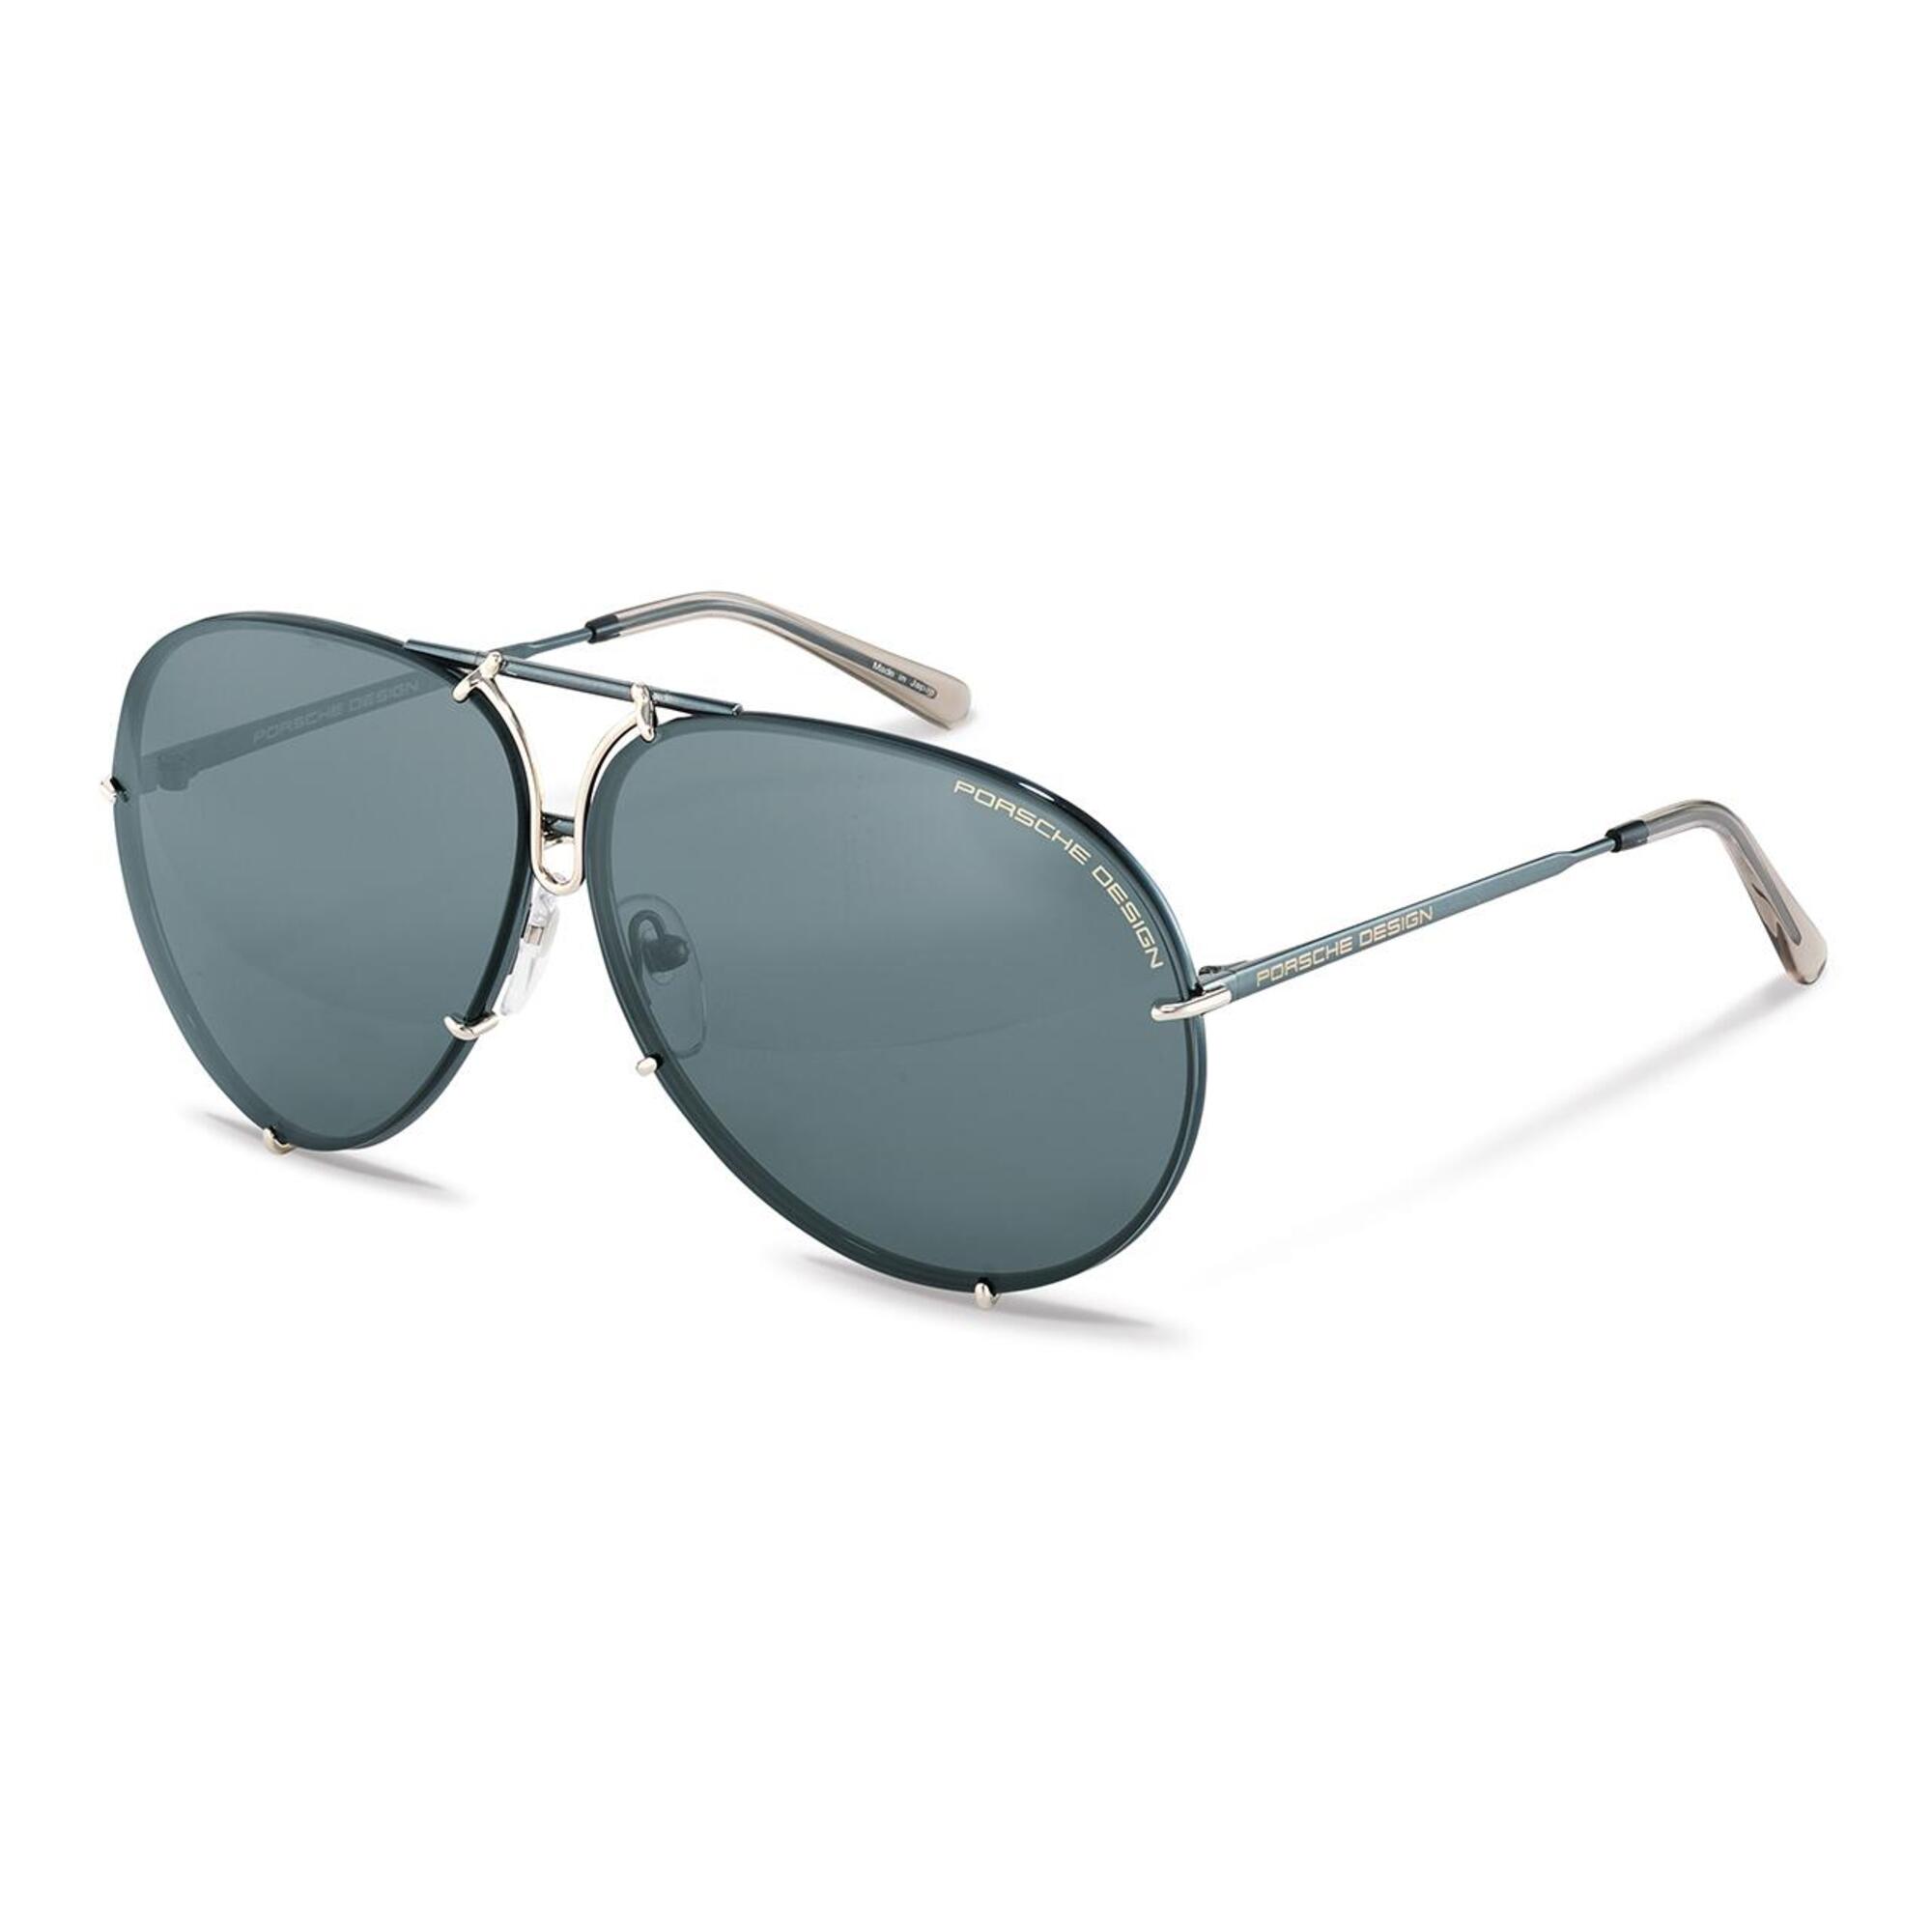 P&acute;8478 SUNGLASSES COLOR OF THE YEAR 2020